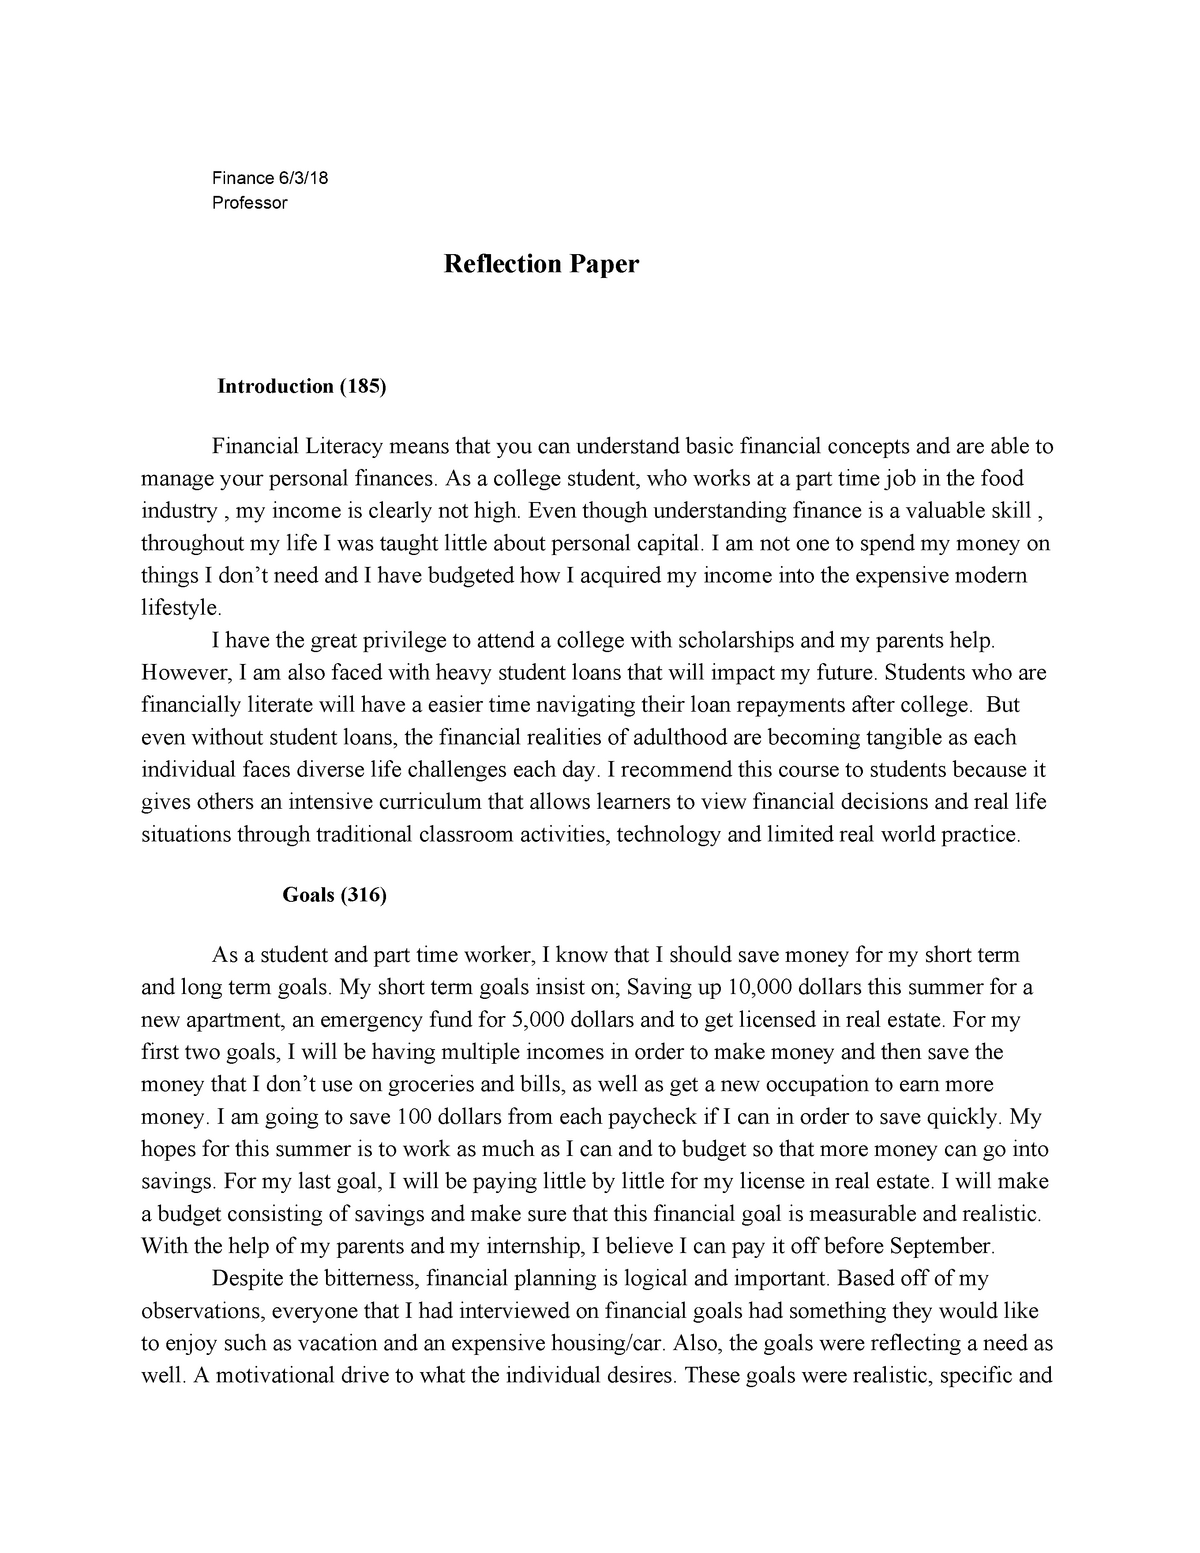 how to write a university reflection paper